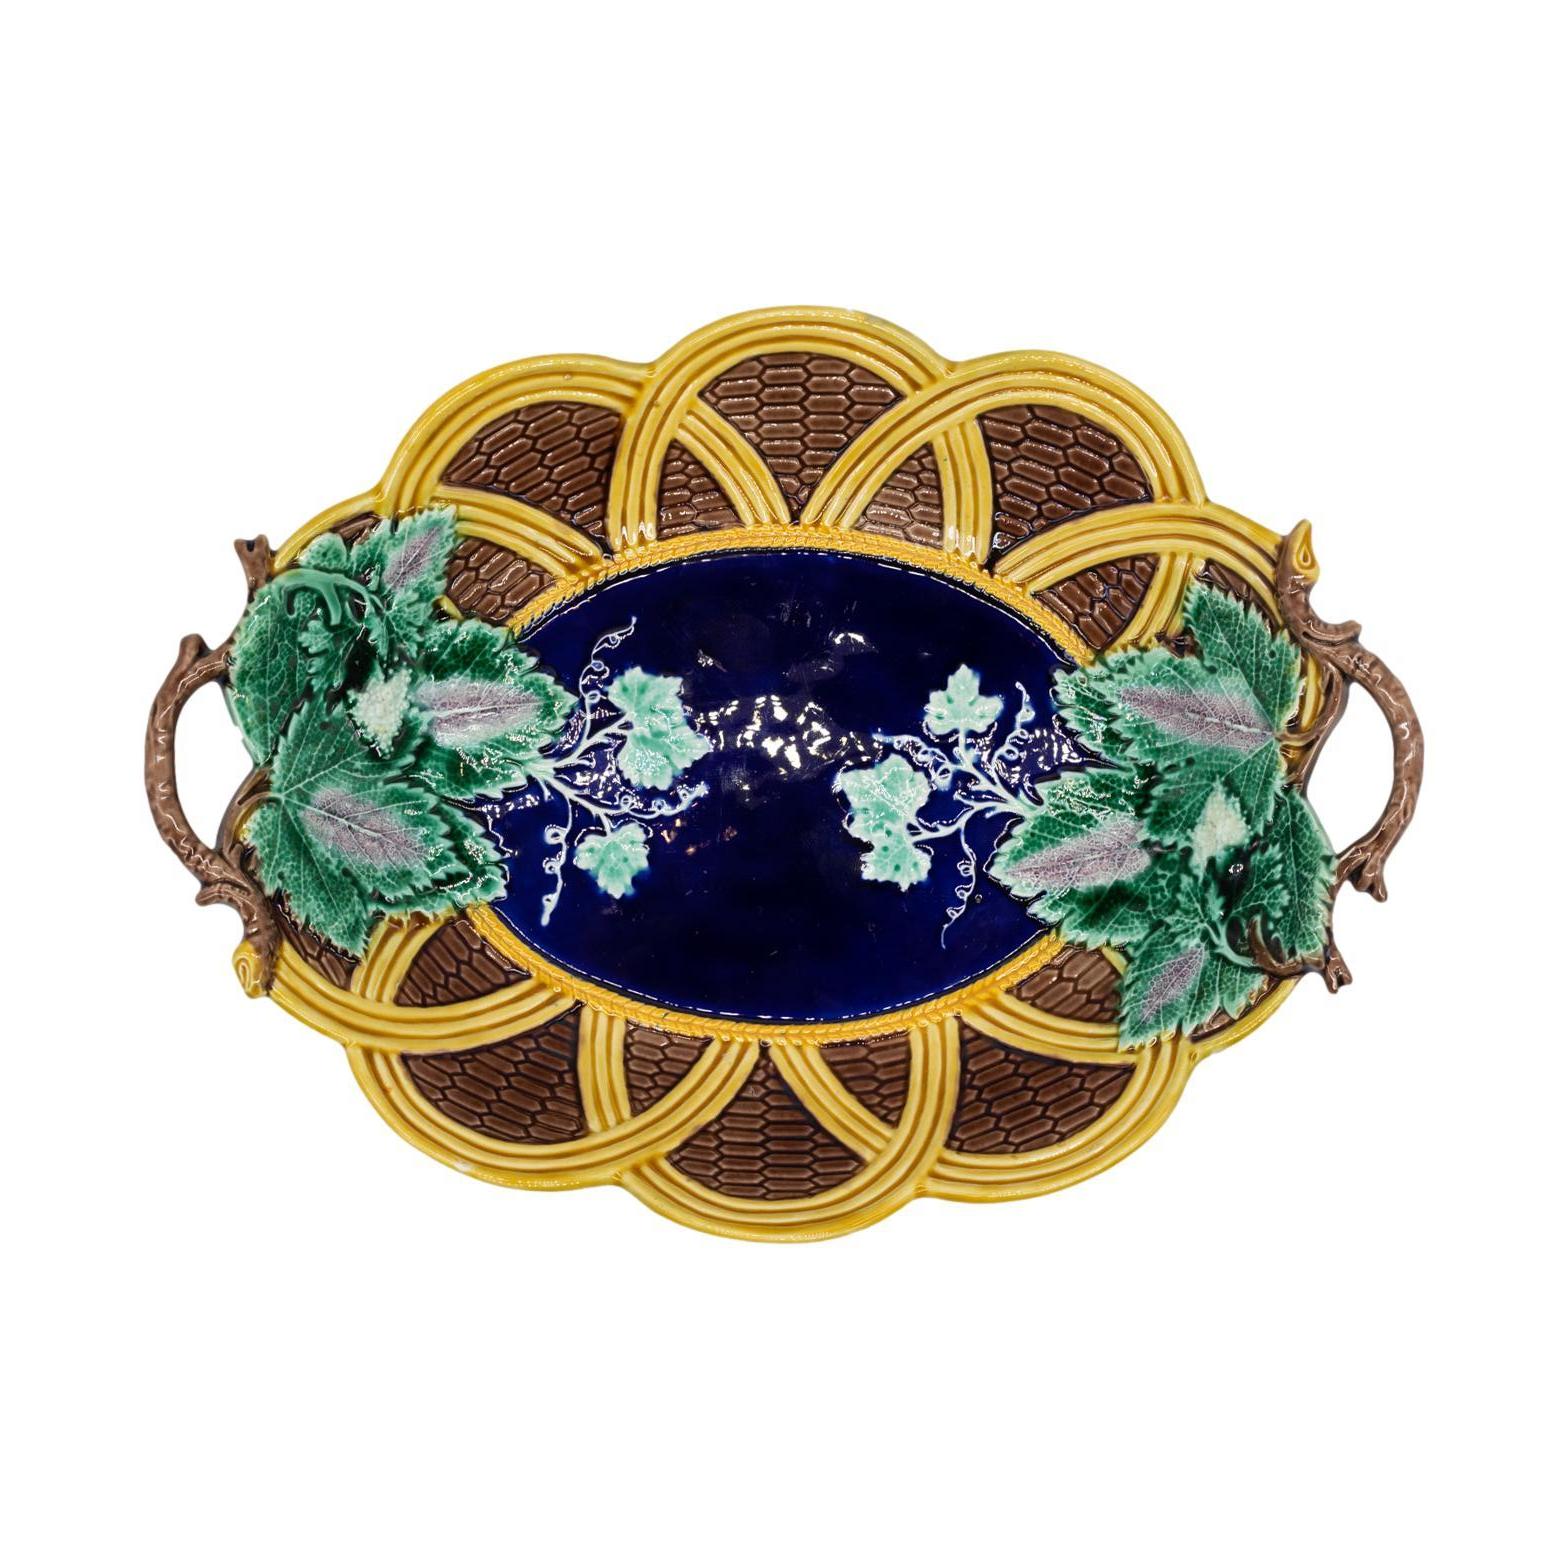 Wedgwood Majolica scalloped oval bread tray, molded as a shallow looped wicker basket, the center glazed in cobalt blue and bordered in yellow-glazed wheat with green, lavender, and white grape leaves and tendrils to either side, surmounted with